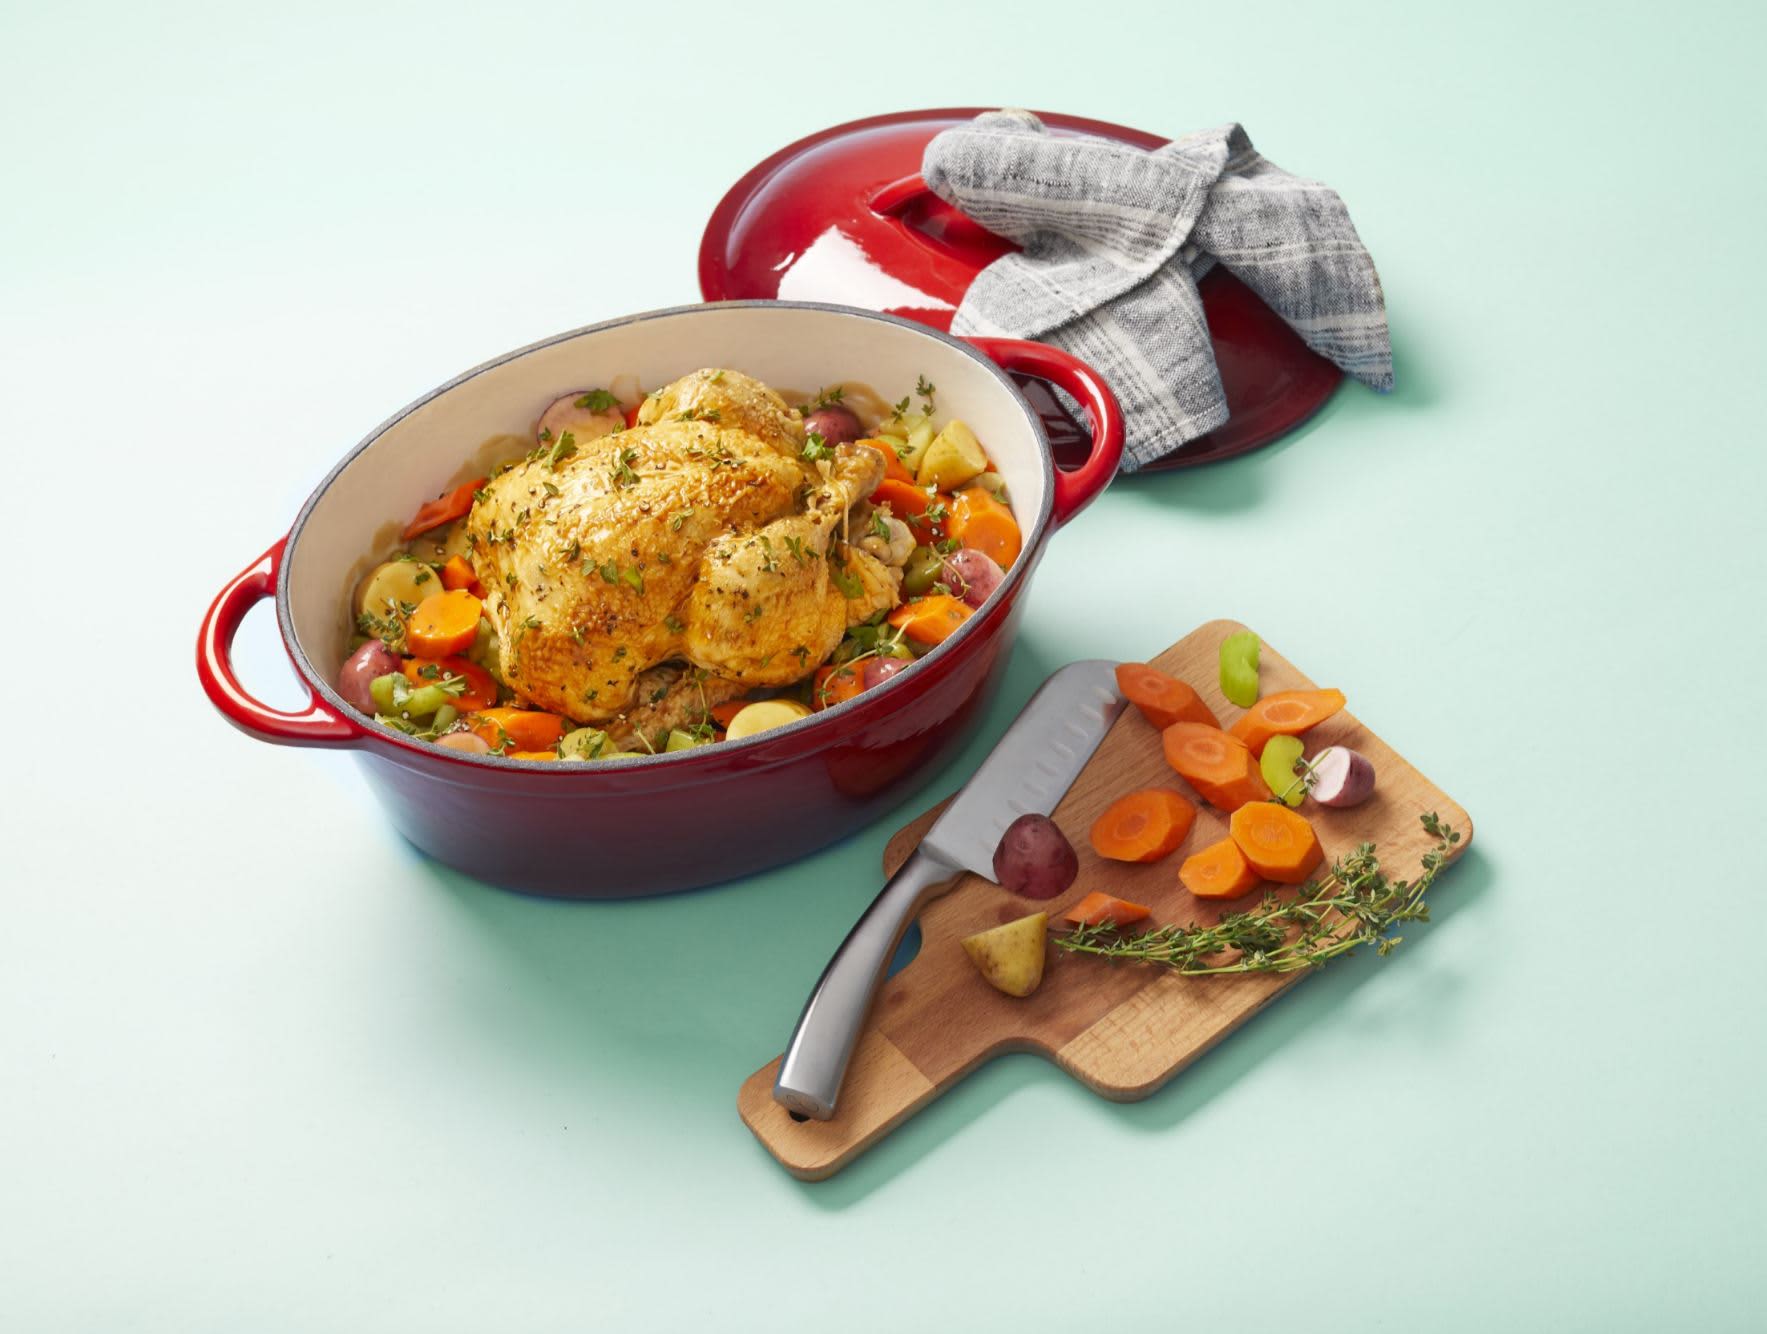 https://cdn.apartmenttherapy.info/image/upload/v1570566060/at/news-culture/2019-10/lidl-cast-iron-pot-chicken.jpg